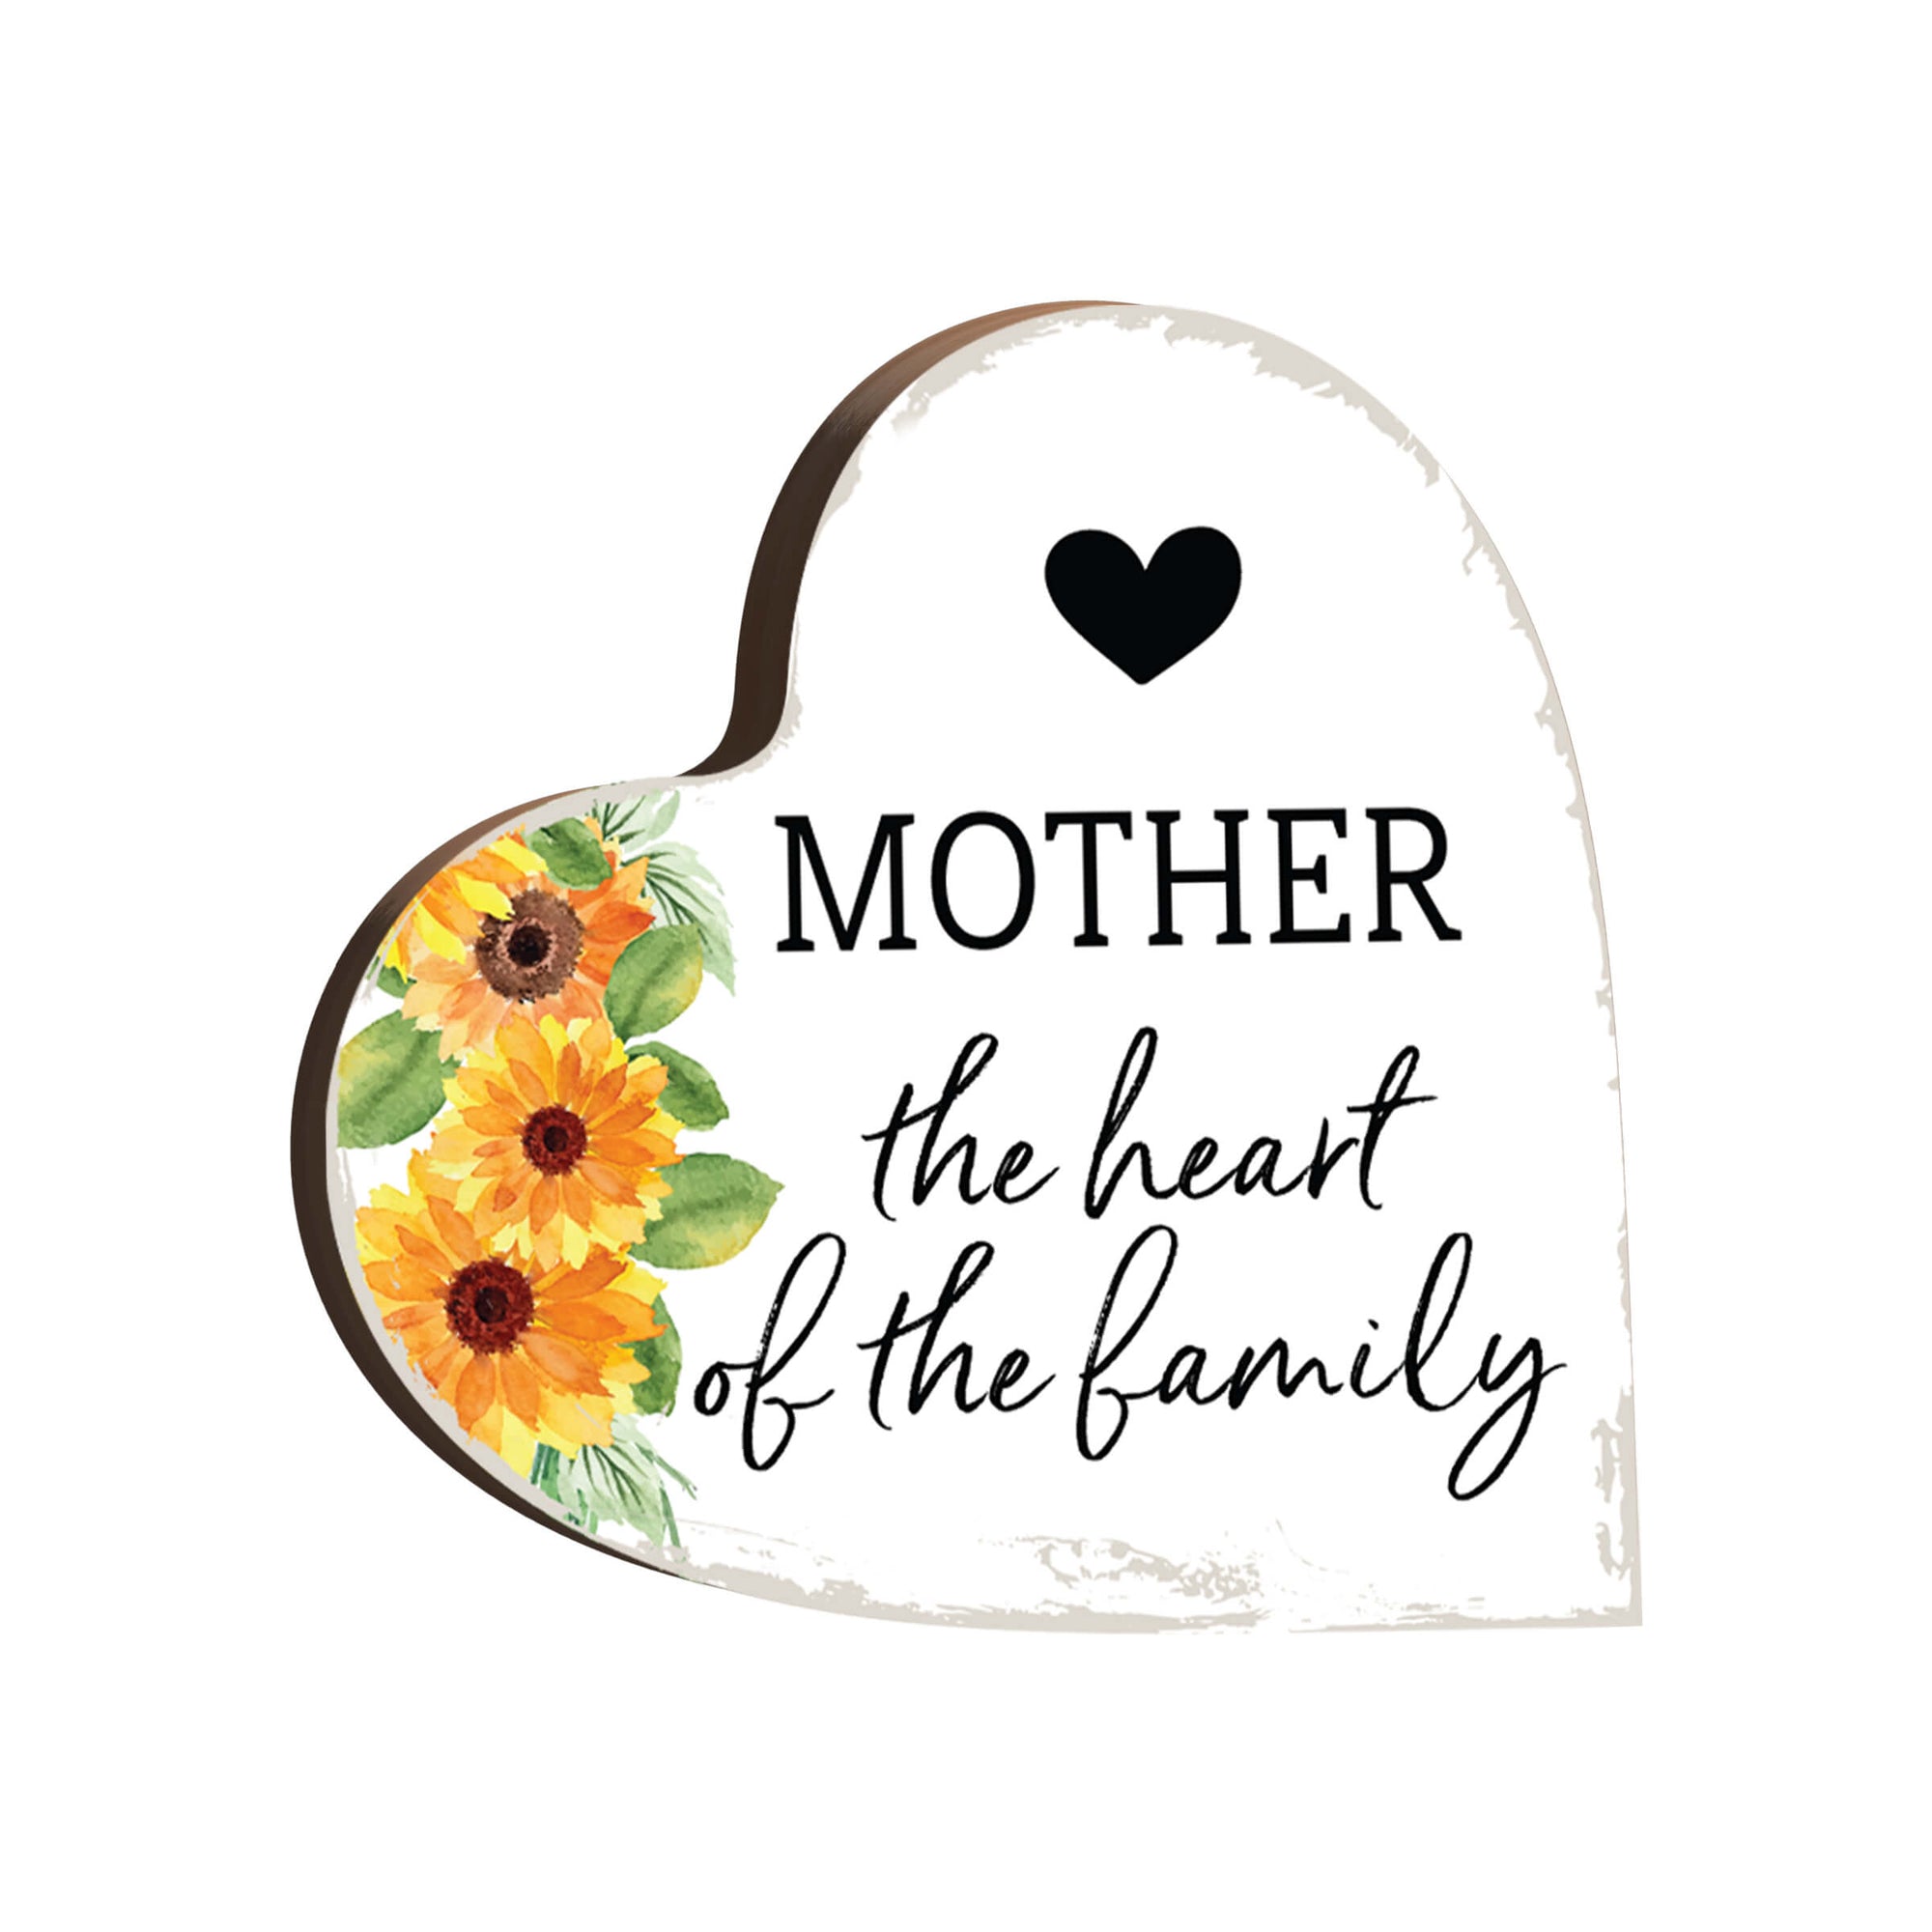 Thoughtful Wooden Shelf Decor - Unique Tabletop Signs Gift for Mom, a Heartfelt Mother's Day Surprise